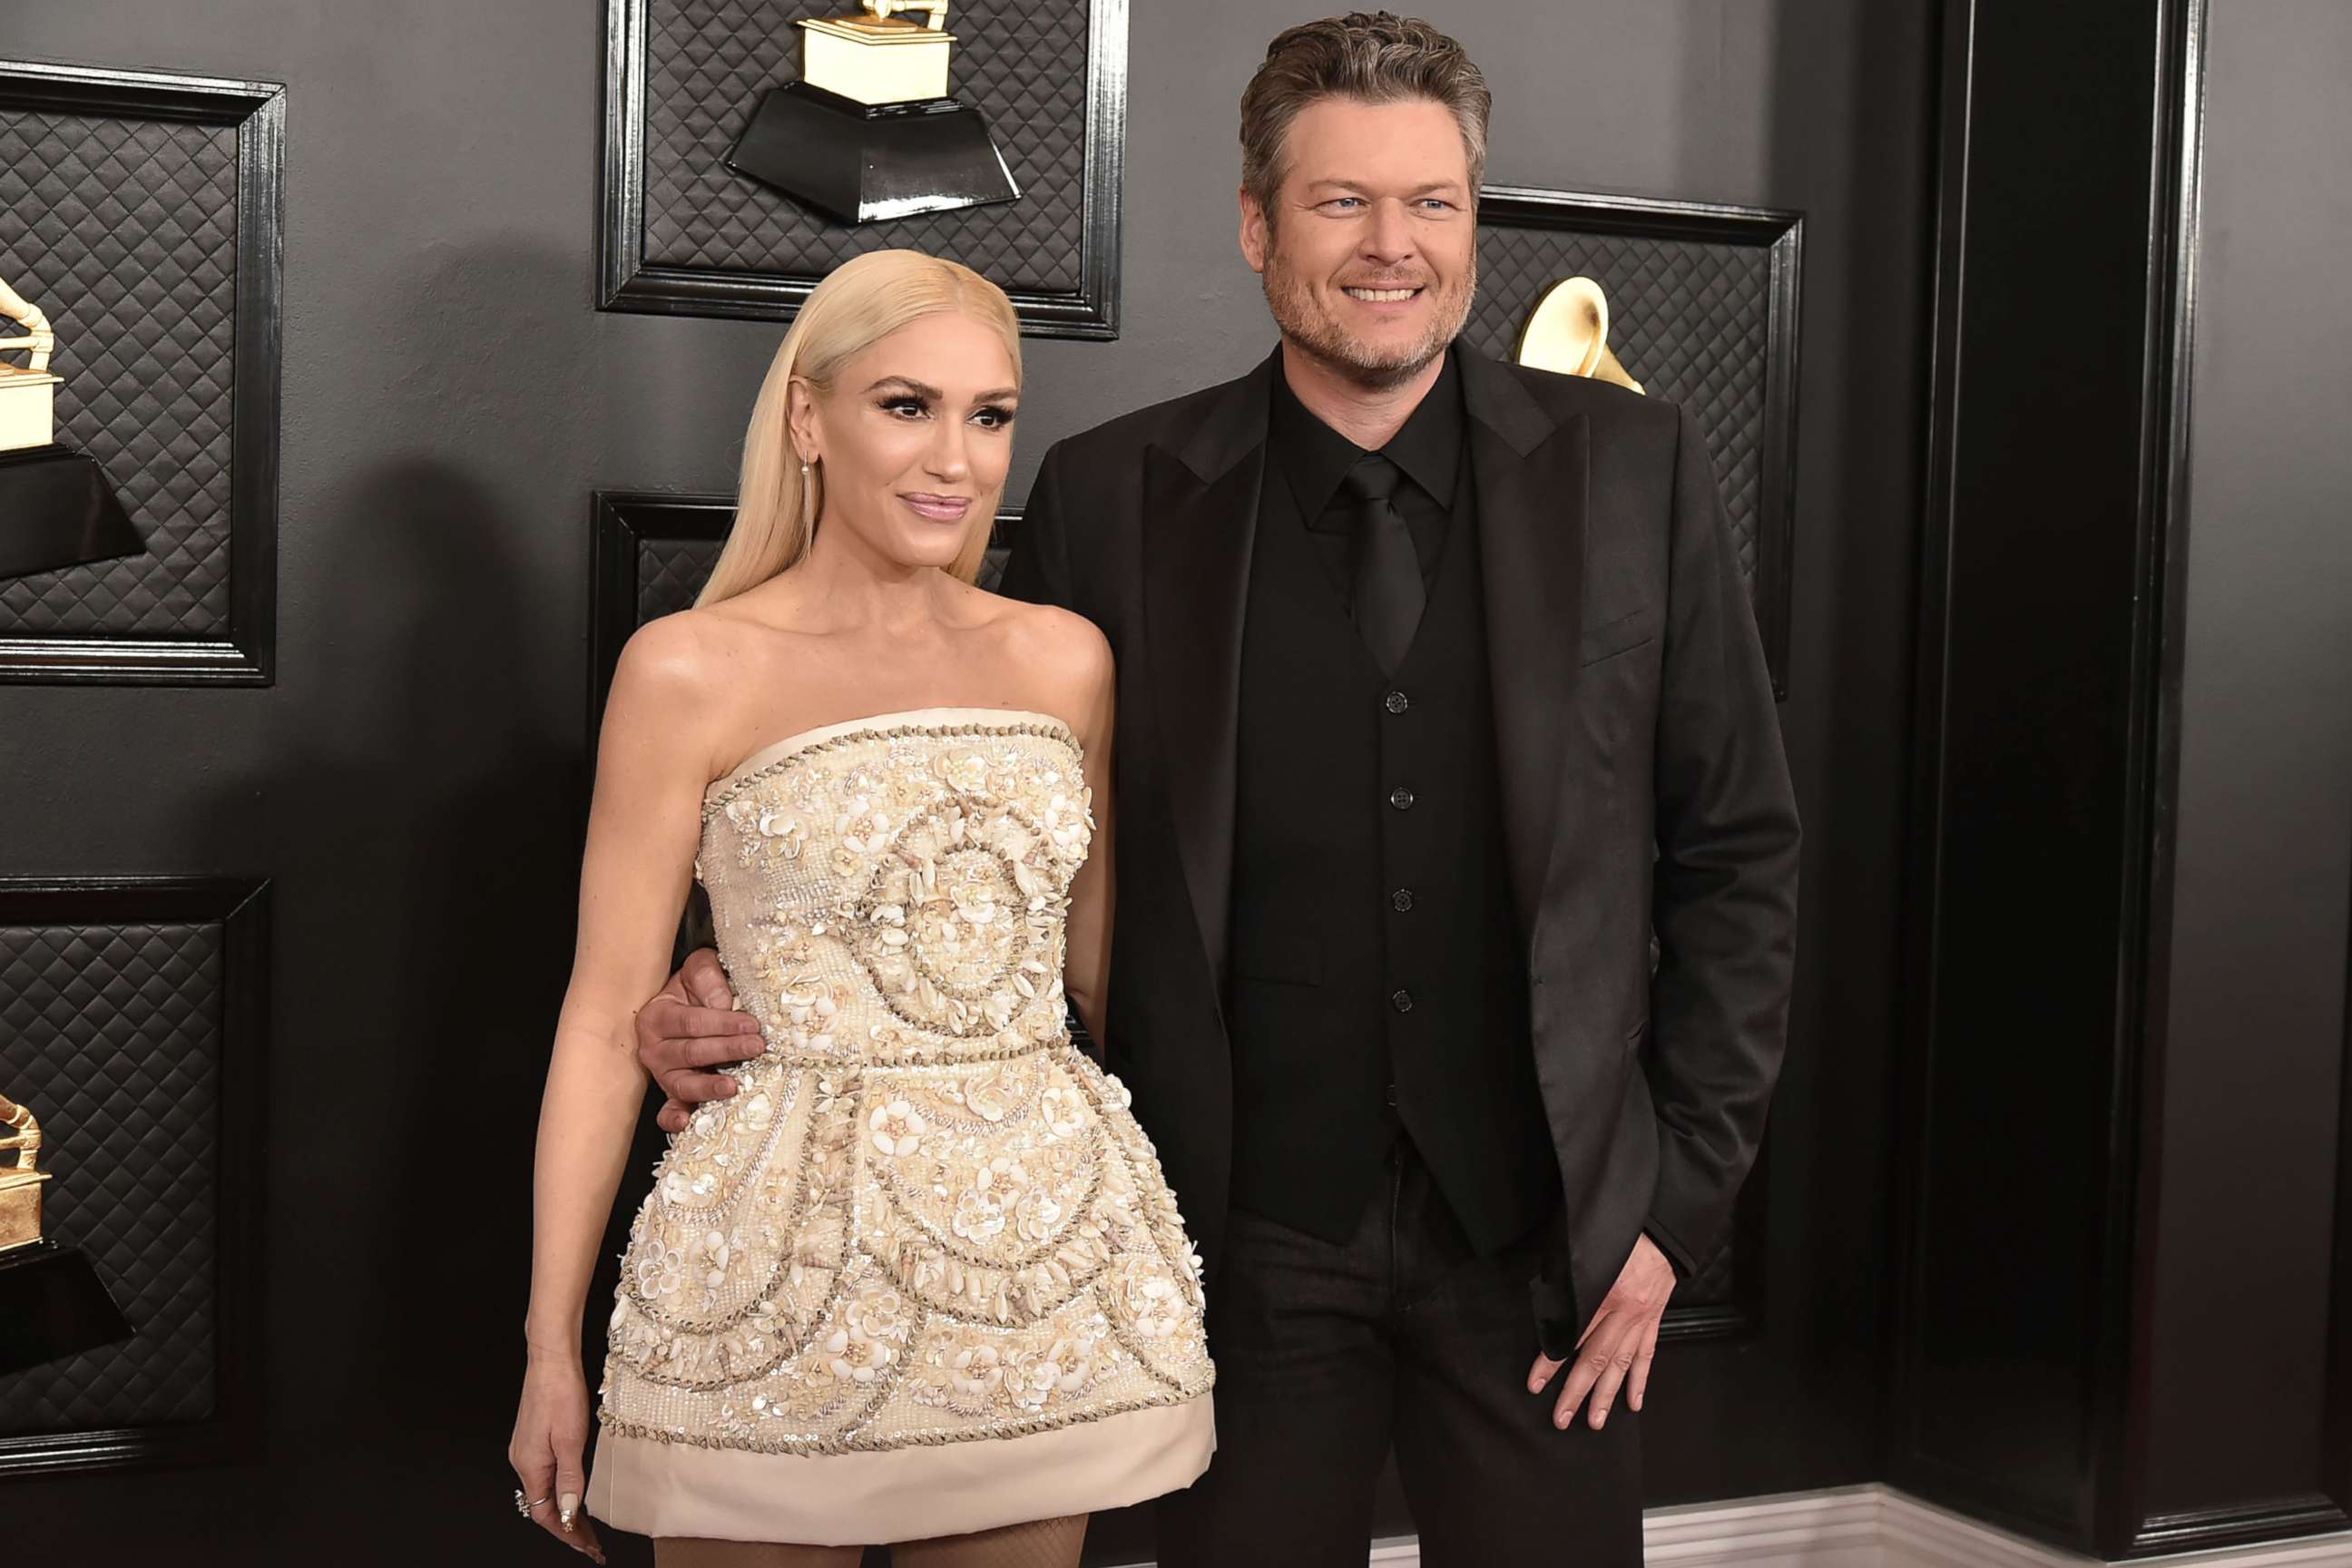 PHOTO: Gwen Stefani and Blake Shelton attend the 62nd Annual Grammy Awards at Staples Center on Jan. 26, 2020 in Los Angeles.